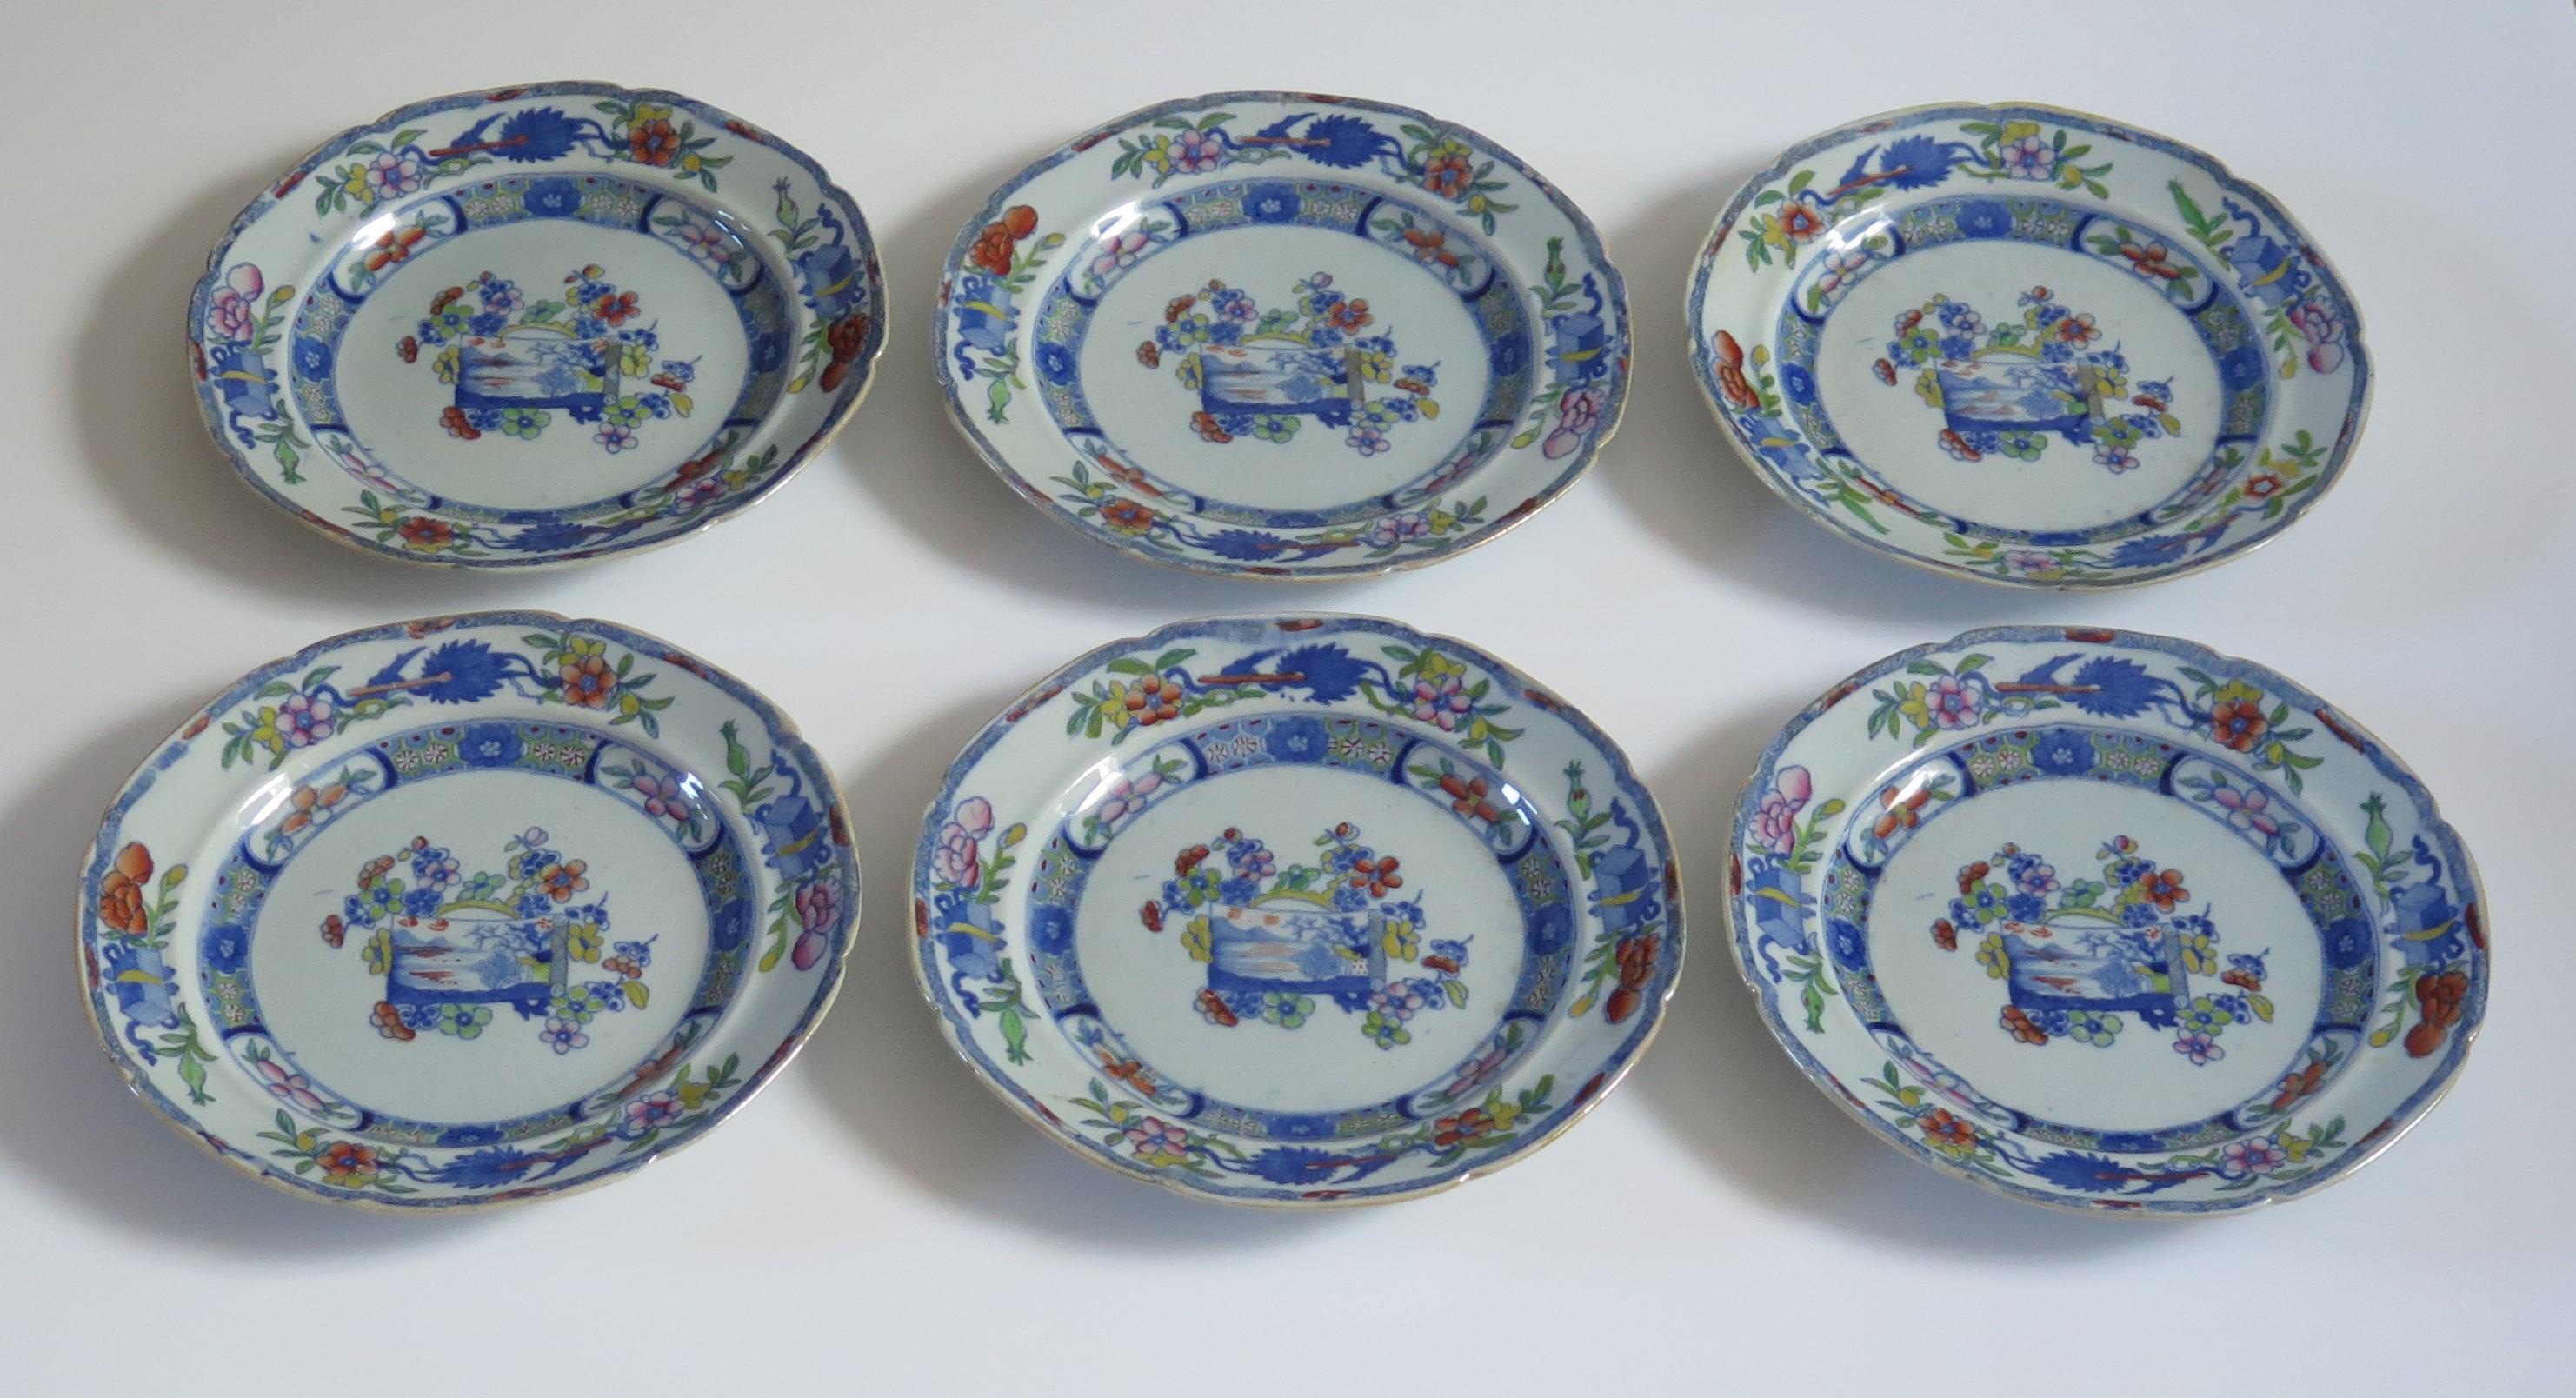 This is a very early and decorative set of six matching Mason's Ironstone side plates, all in the Scroll Landscape and Prunus pattern and dating to the earliest period, circa 1813-1820. 

Sets of very early Mason's plates in this pattern are rare.